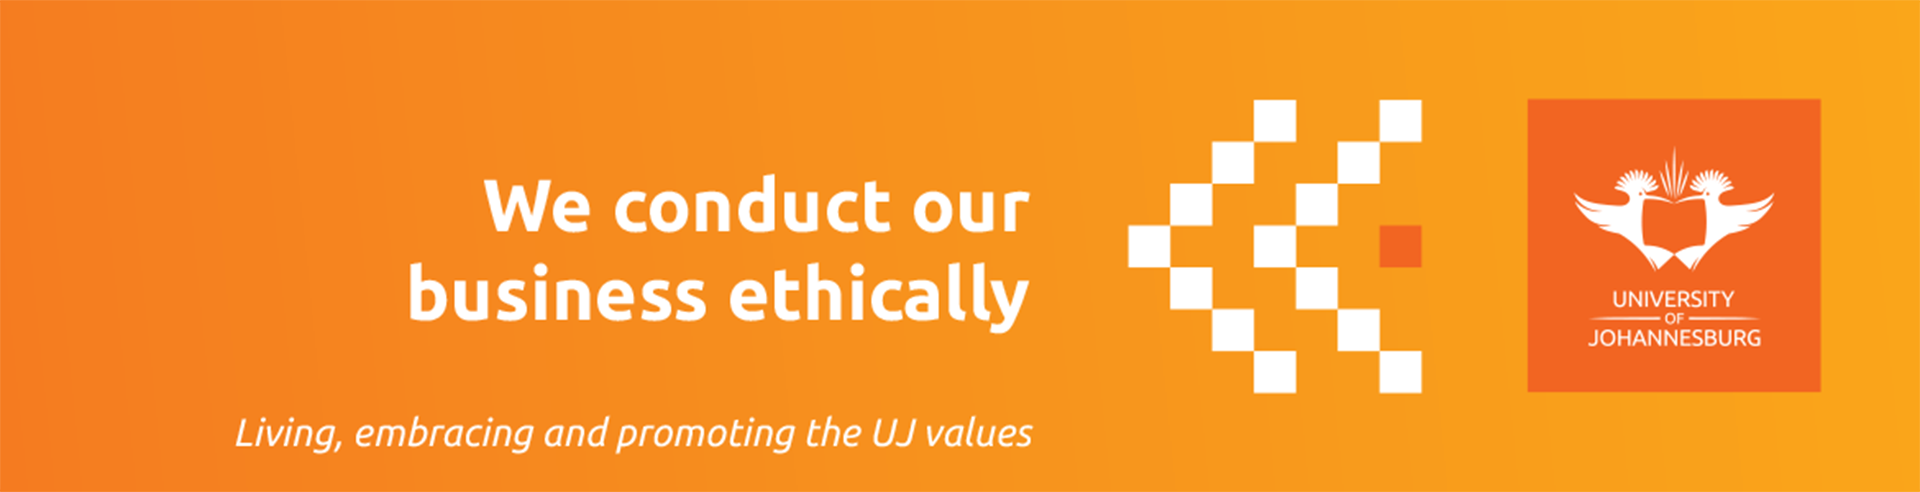 Uj Values Expressions Posters 2020 Ulink 1170x300mm 4